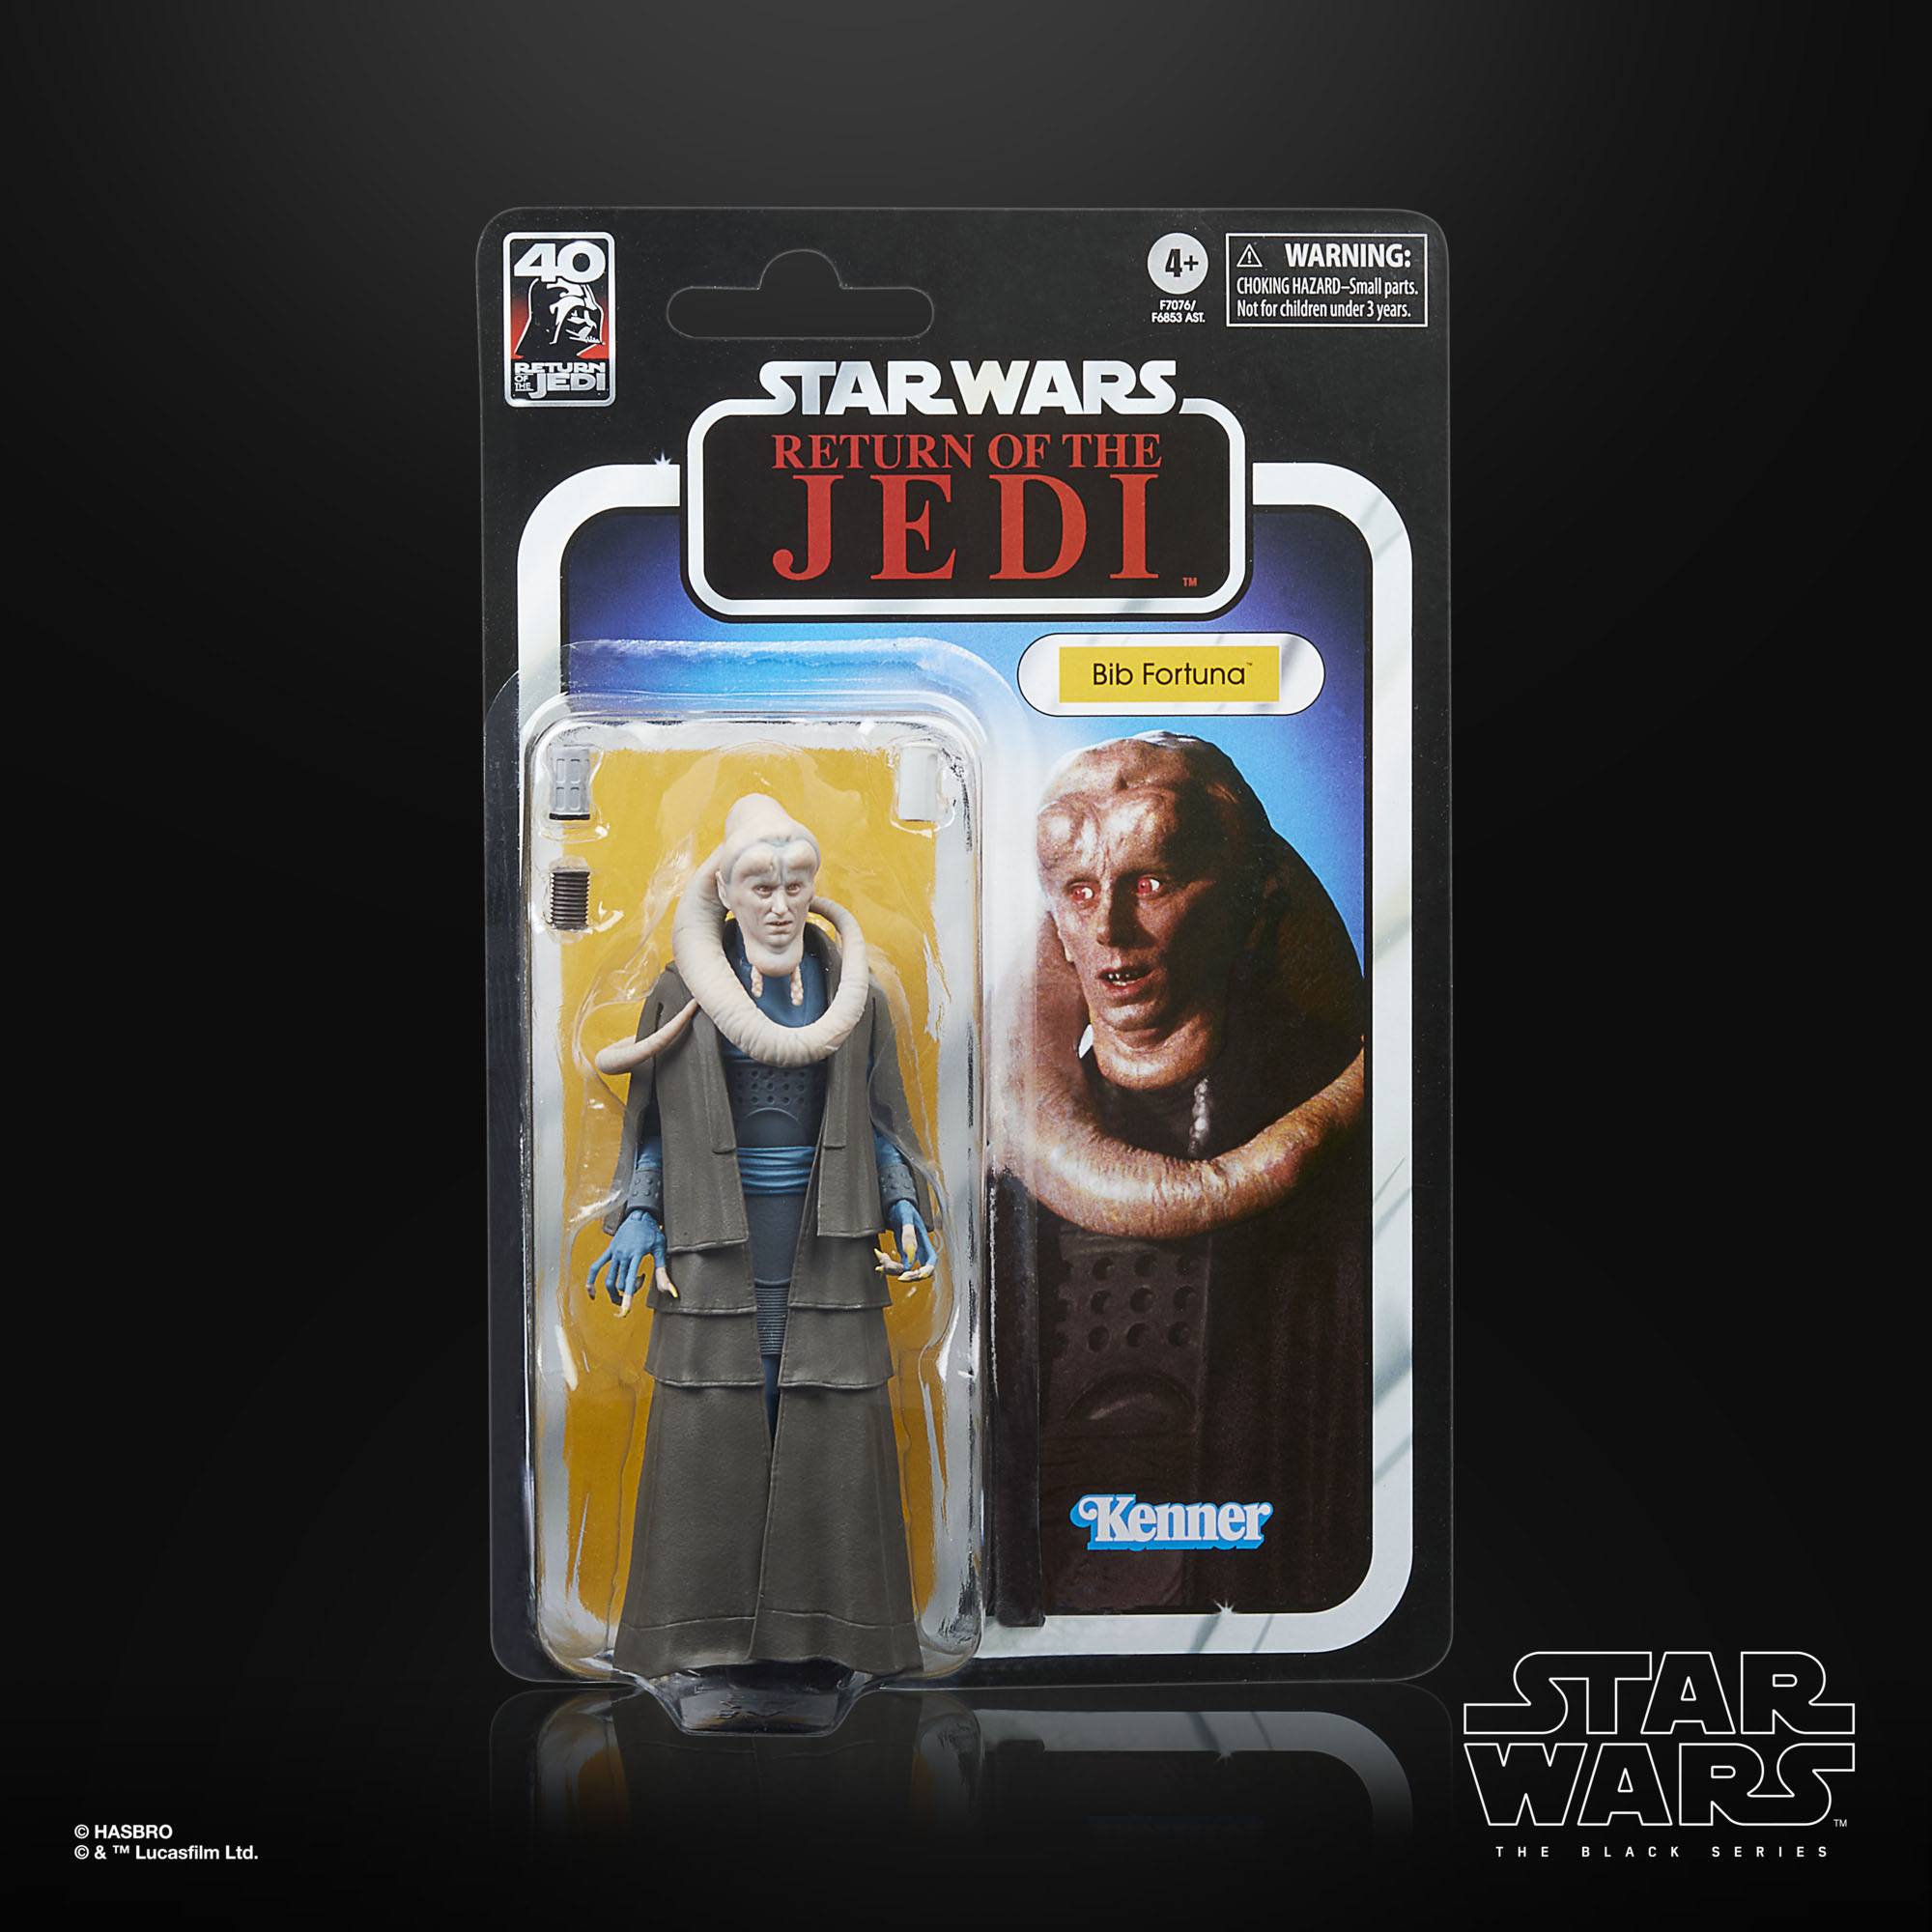 Star Wars The Black Series Return of the Jedi 40th Anniversary 6-Inch Figures Wave 2 Case of 5 HSF6853B 